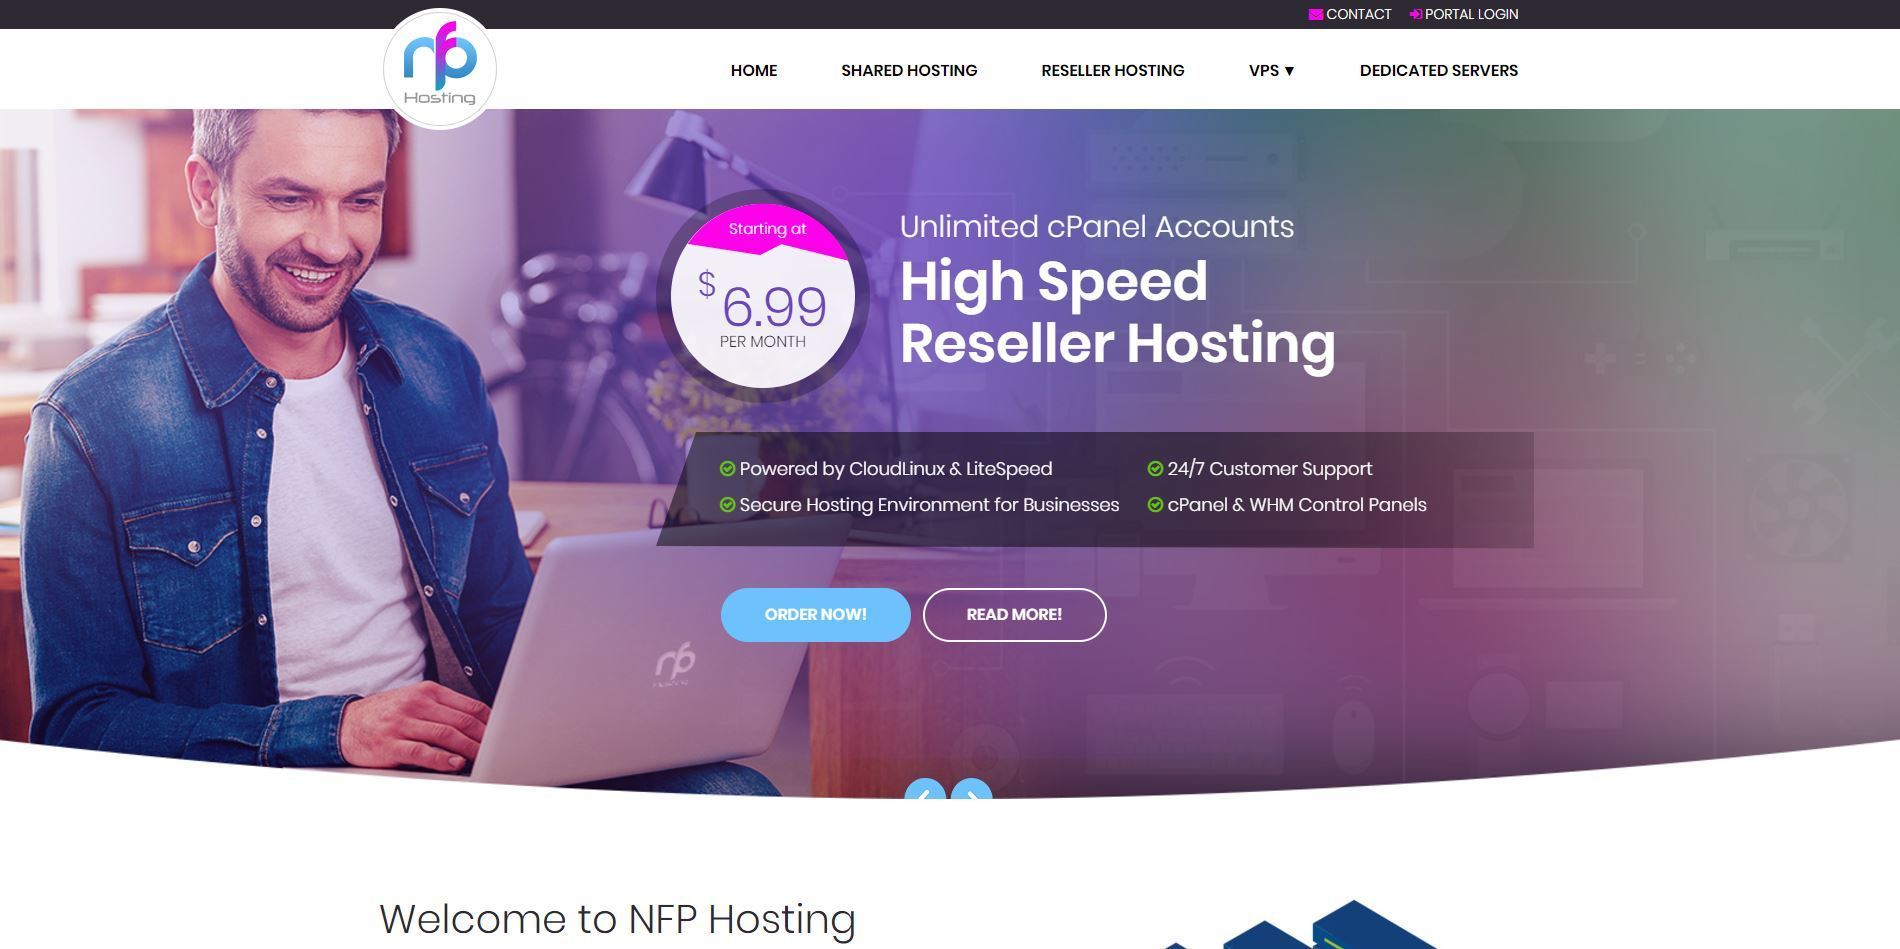 NFPHosting - 5 VPS Reseller Offers - Deploy in Los Angeles, NY, and Chicago from $18/yr!